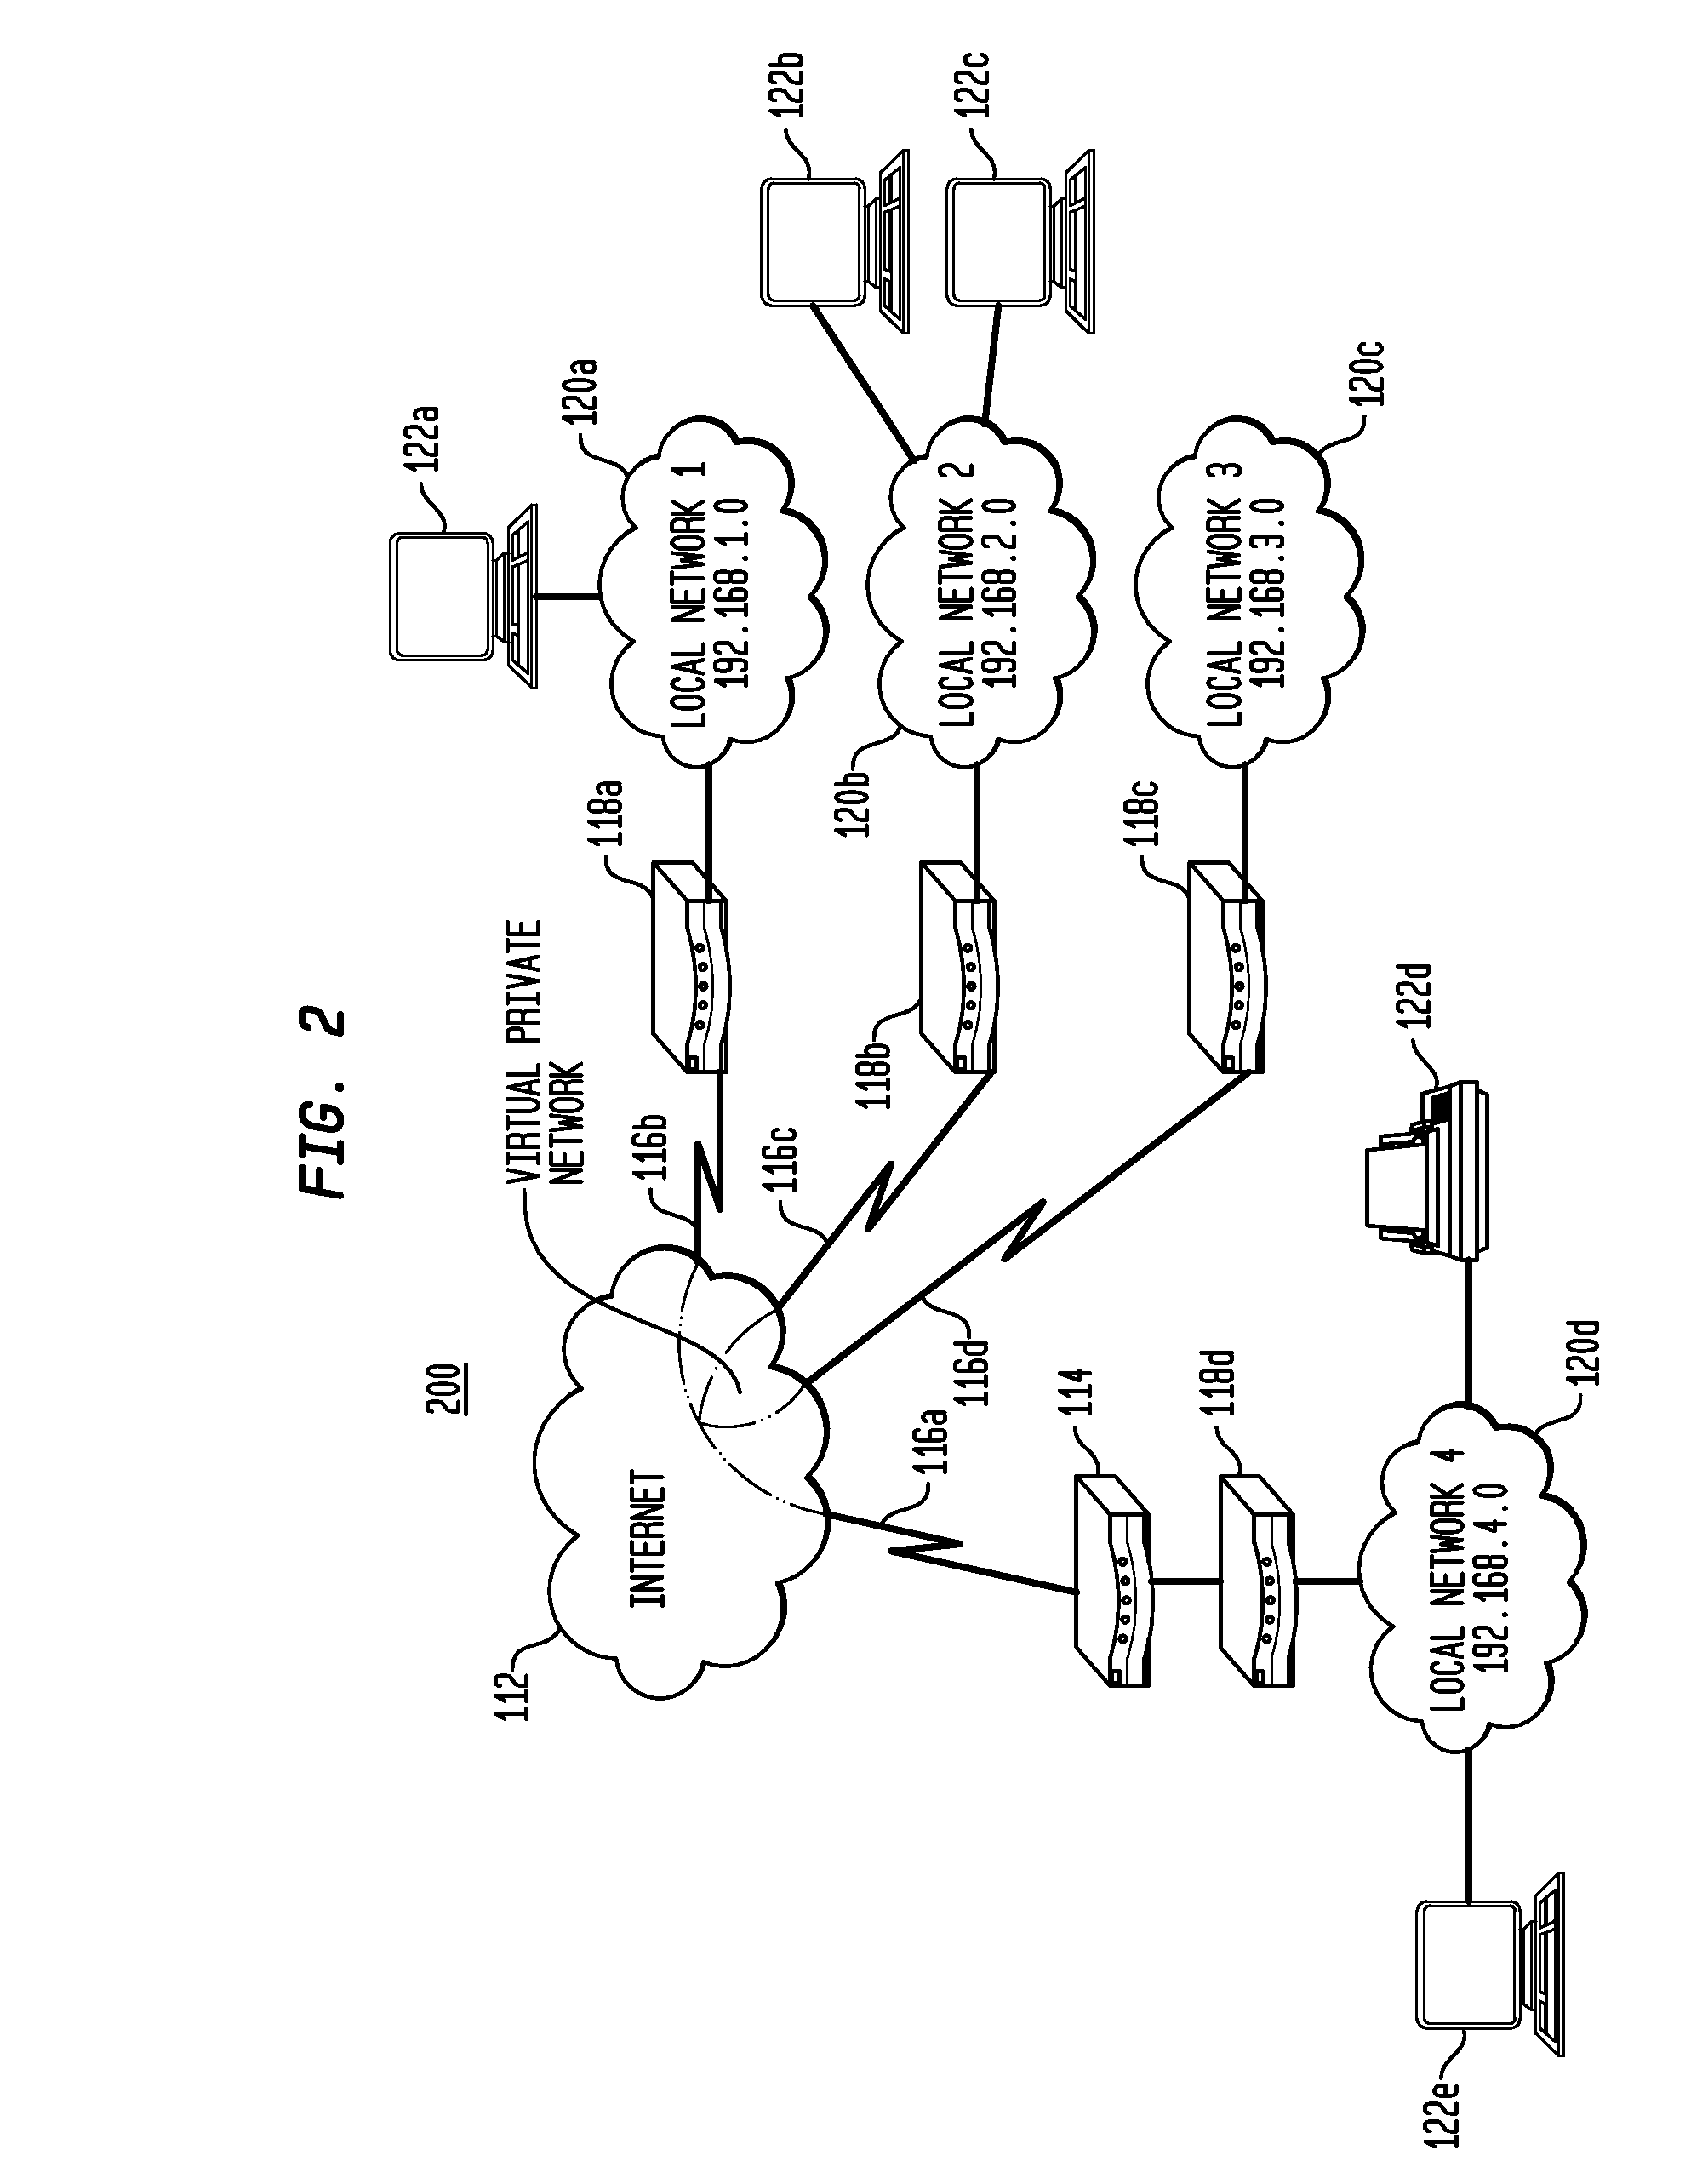 Systems and Methods for Automatically Reconfiguring Virtual Private Networks